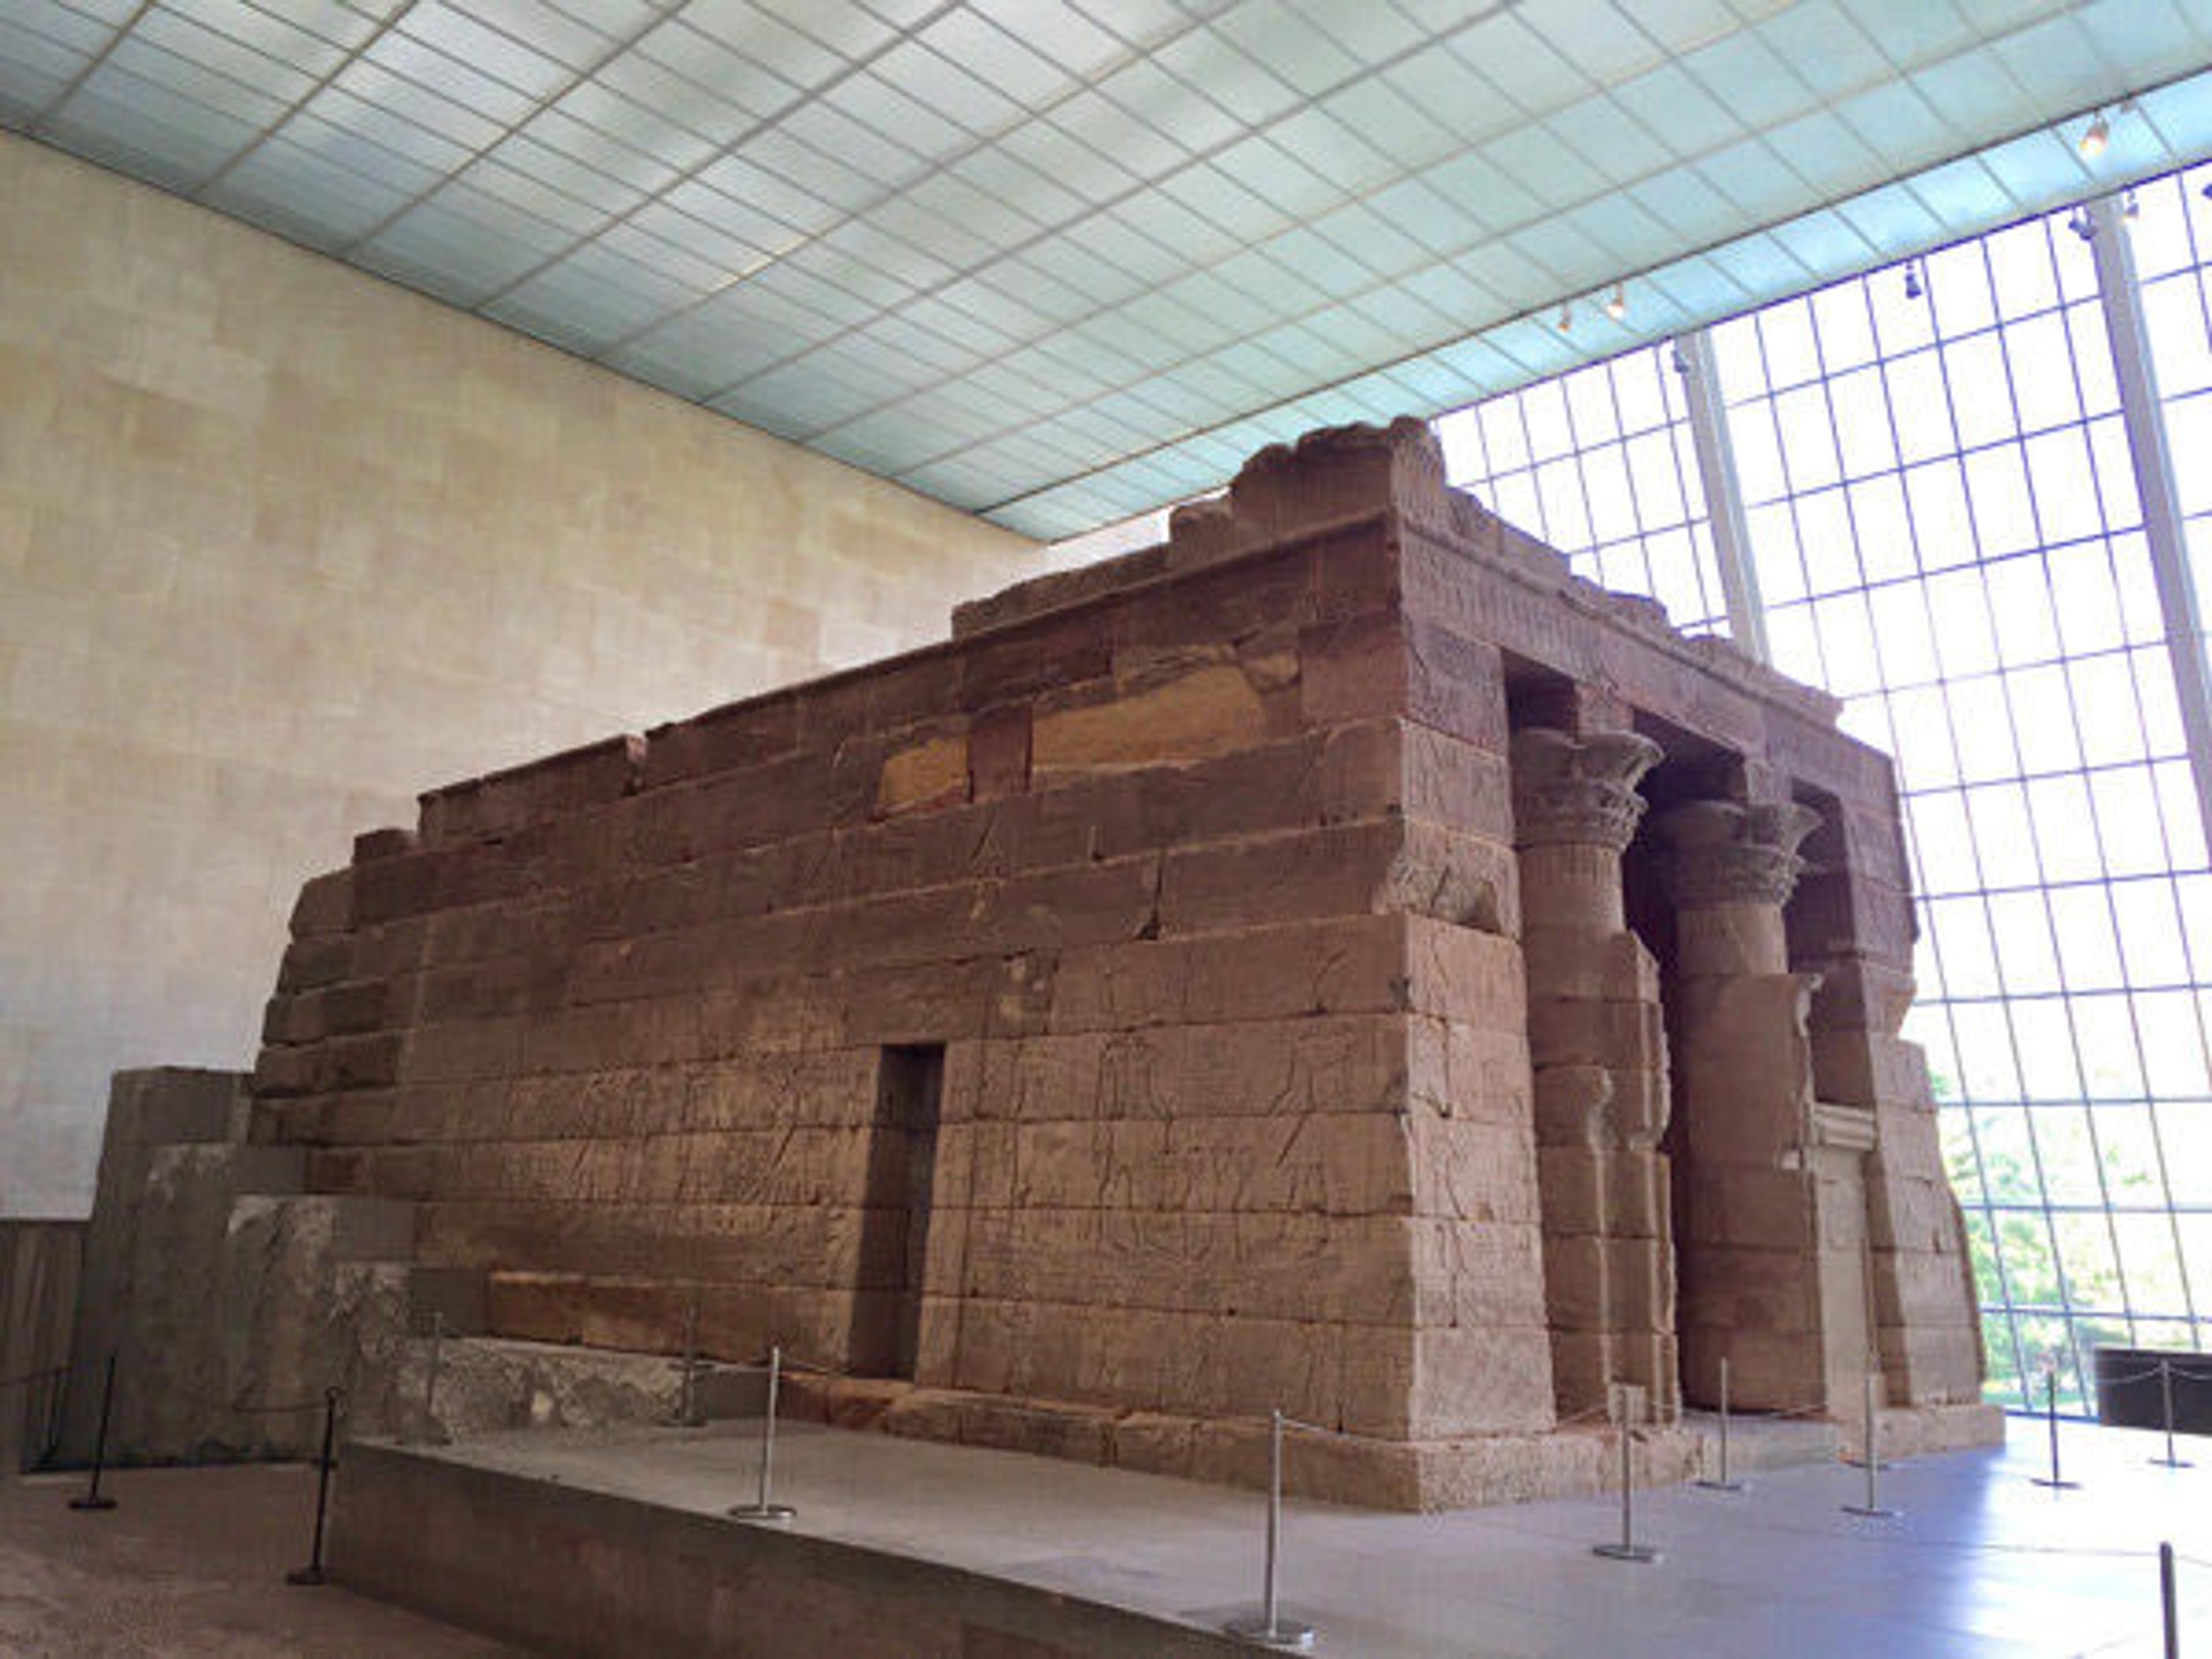 The Temple of Dendur in The Sackler Wing—one of Telly Leung's favorite galleries in the Met